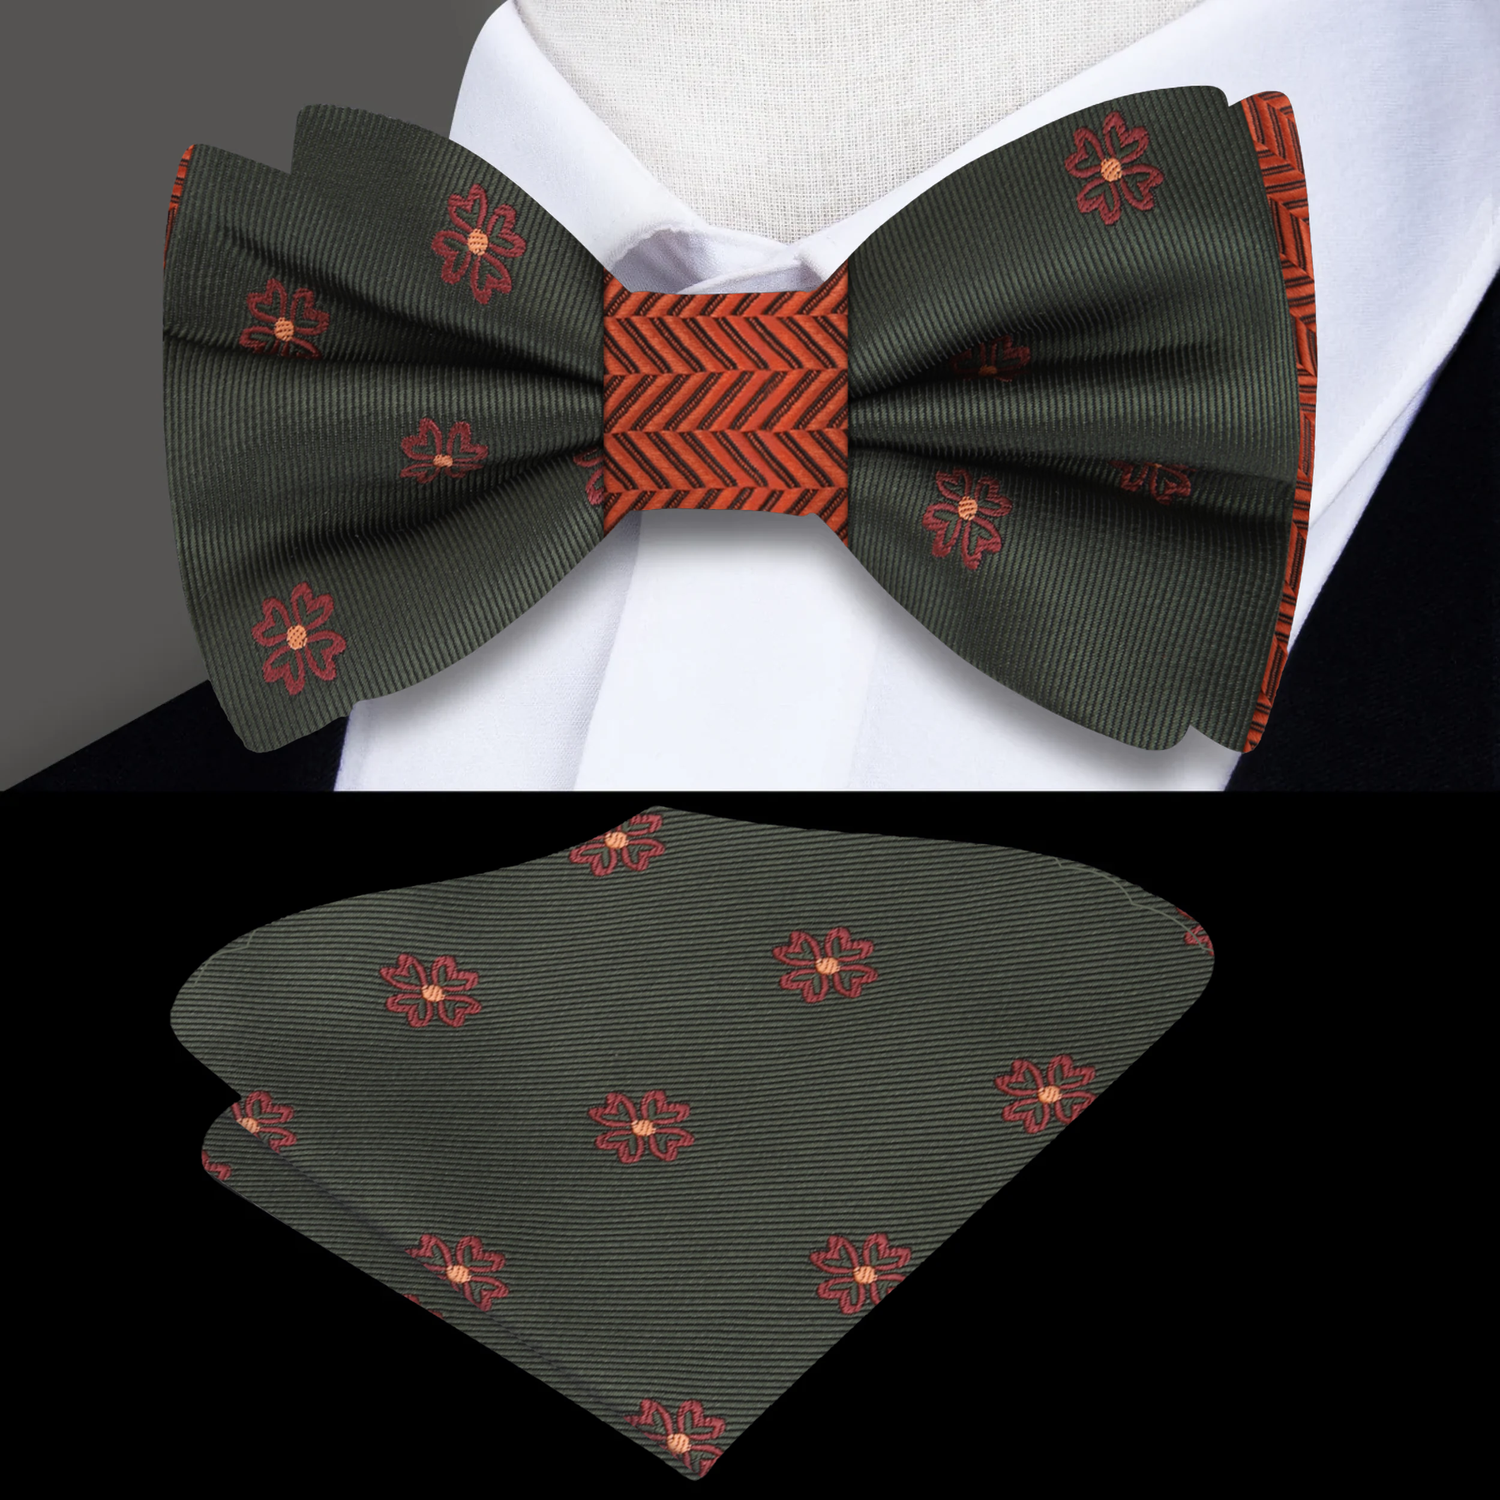 Charcoal, Red, Orange Clovers and Crosshatch Bow tie and square